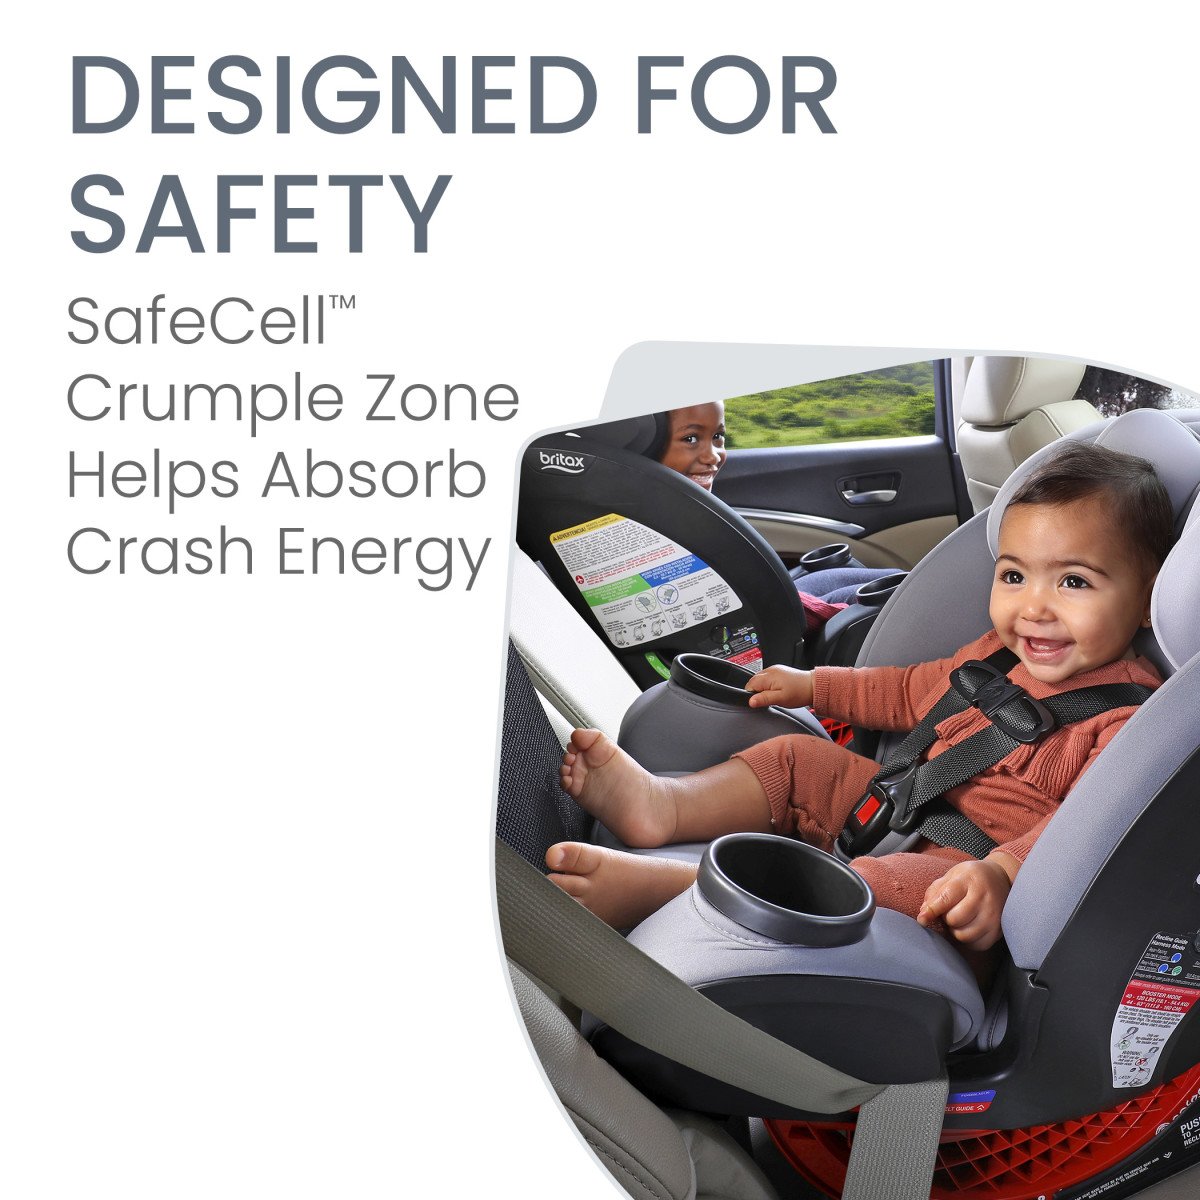 Designed for Safety SafeCell Crumple Zone helps absorb crash energy